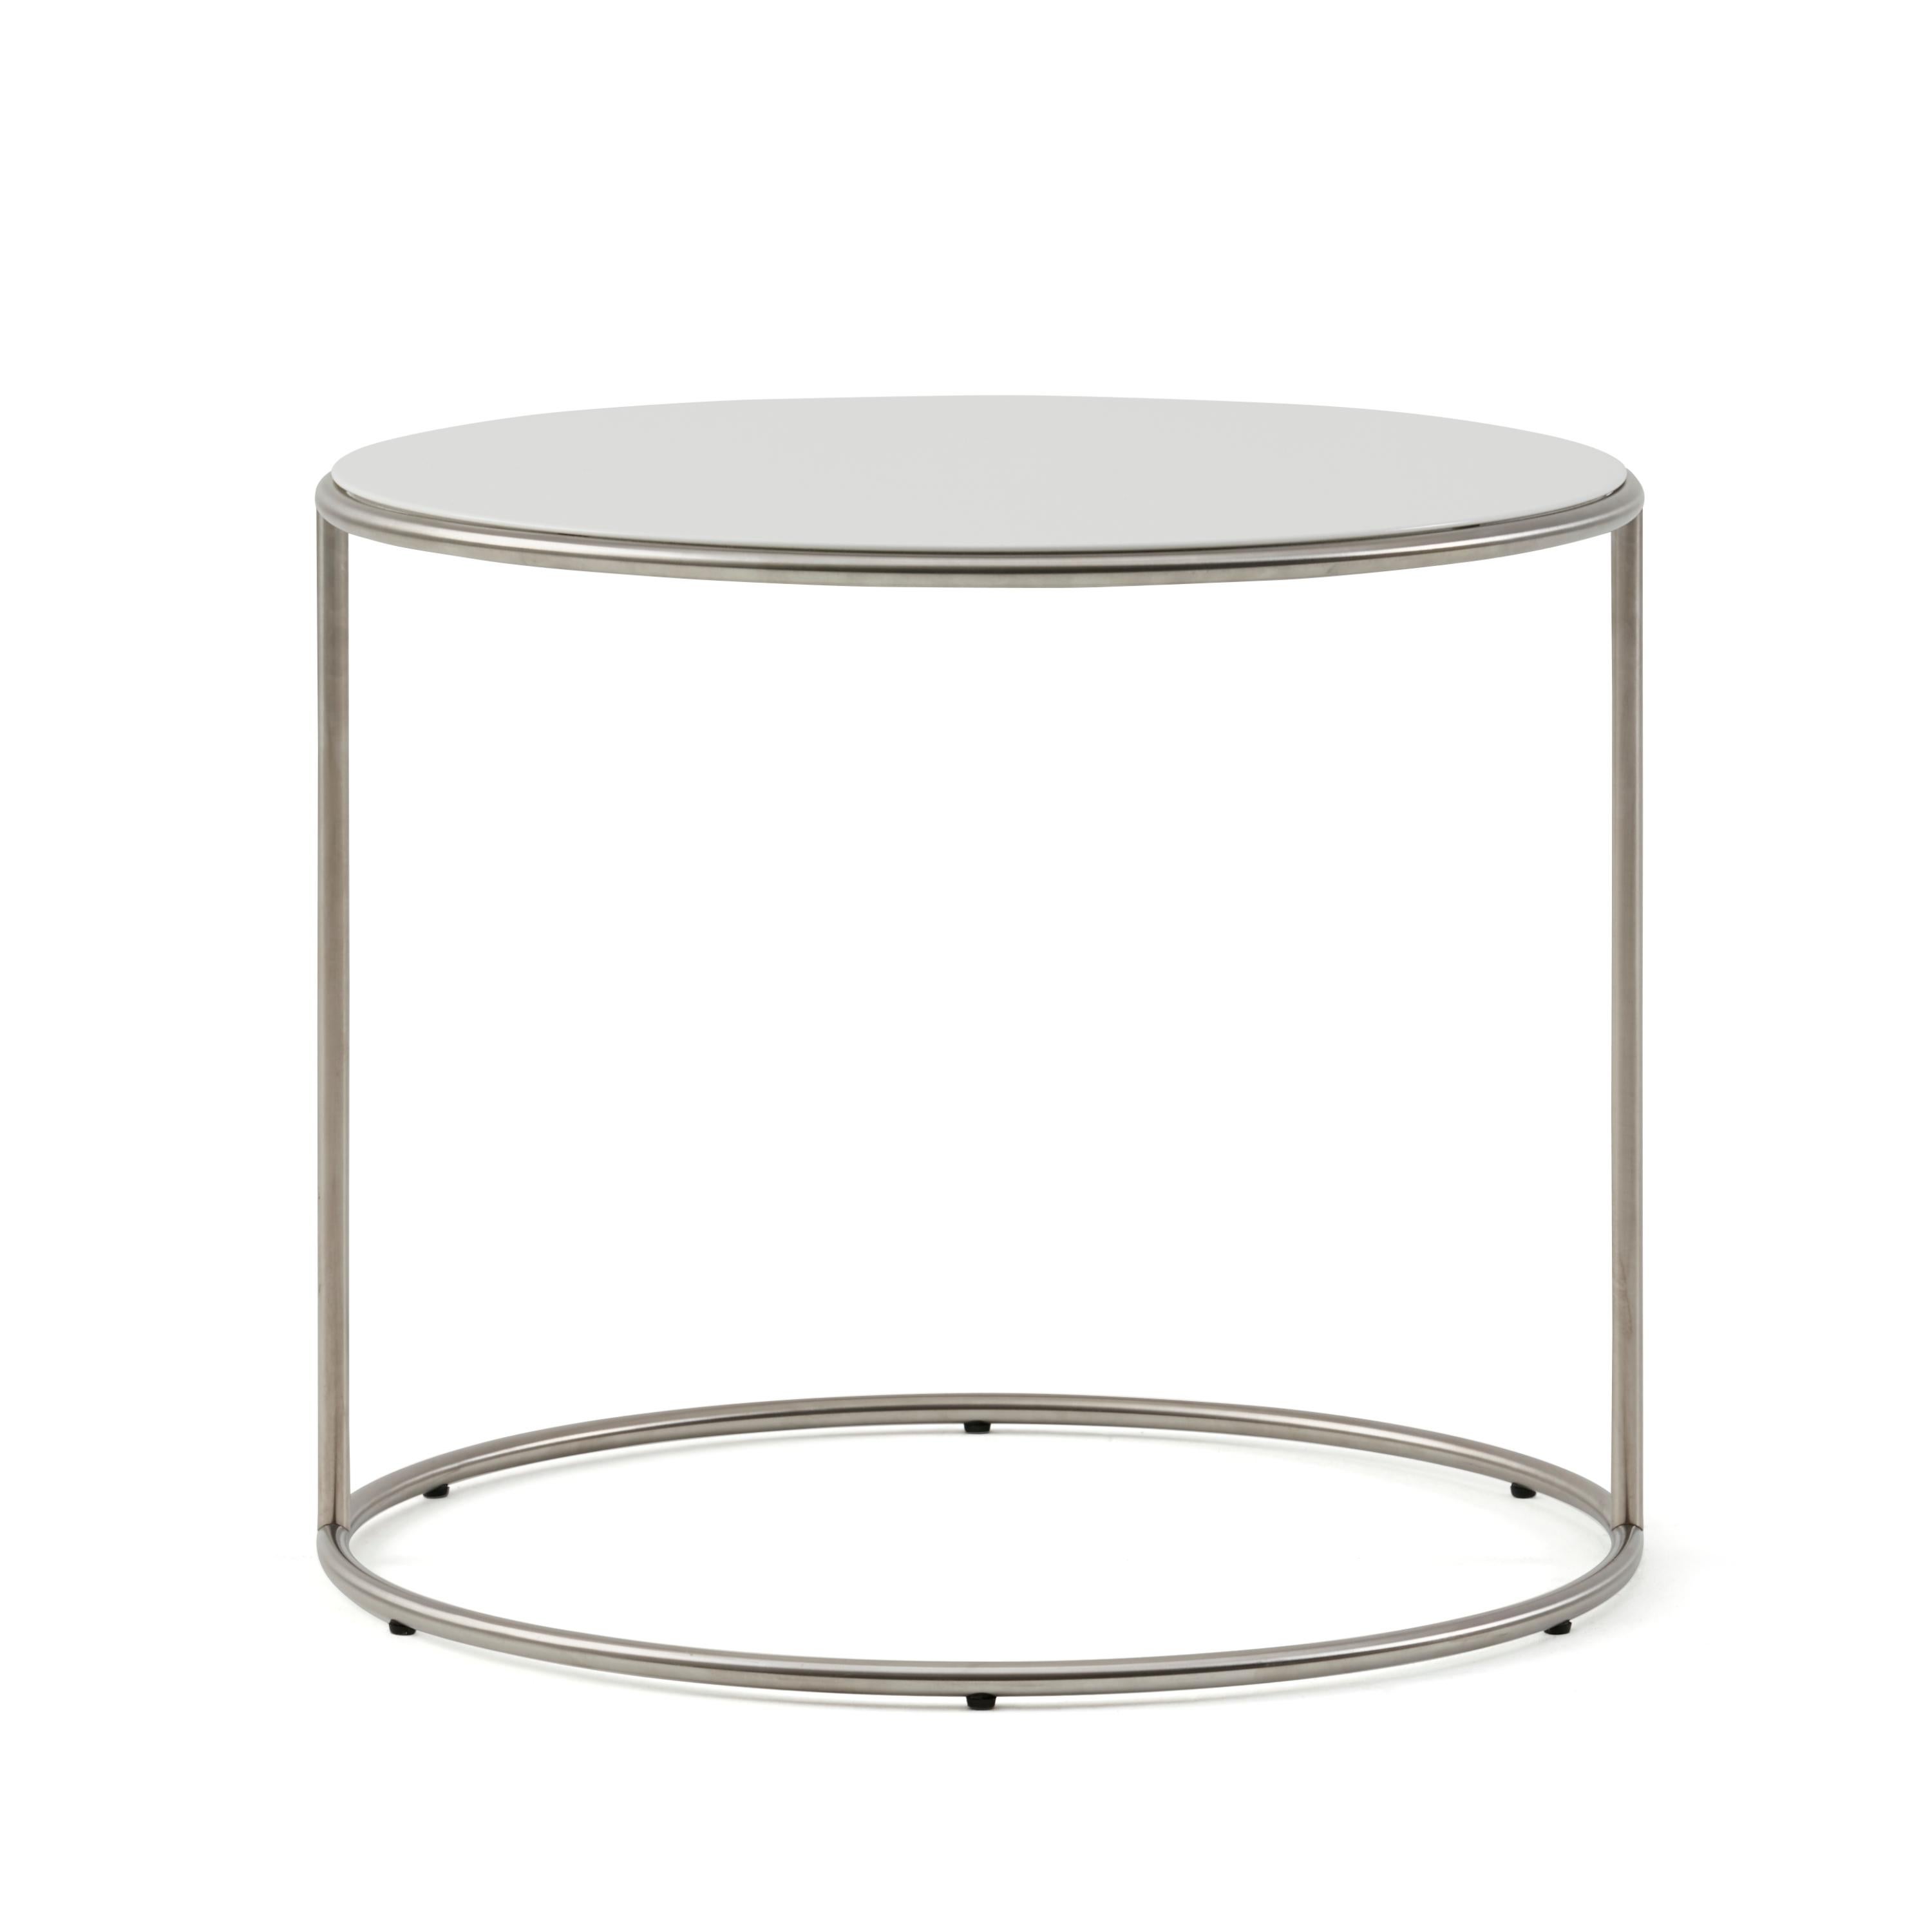 For Sale: White (01_White) Catalano and Marelli Cannot Table Lacquered Matte or Glossy Finish, Cappellini 3